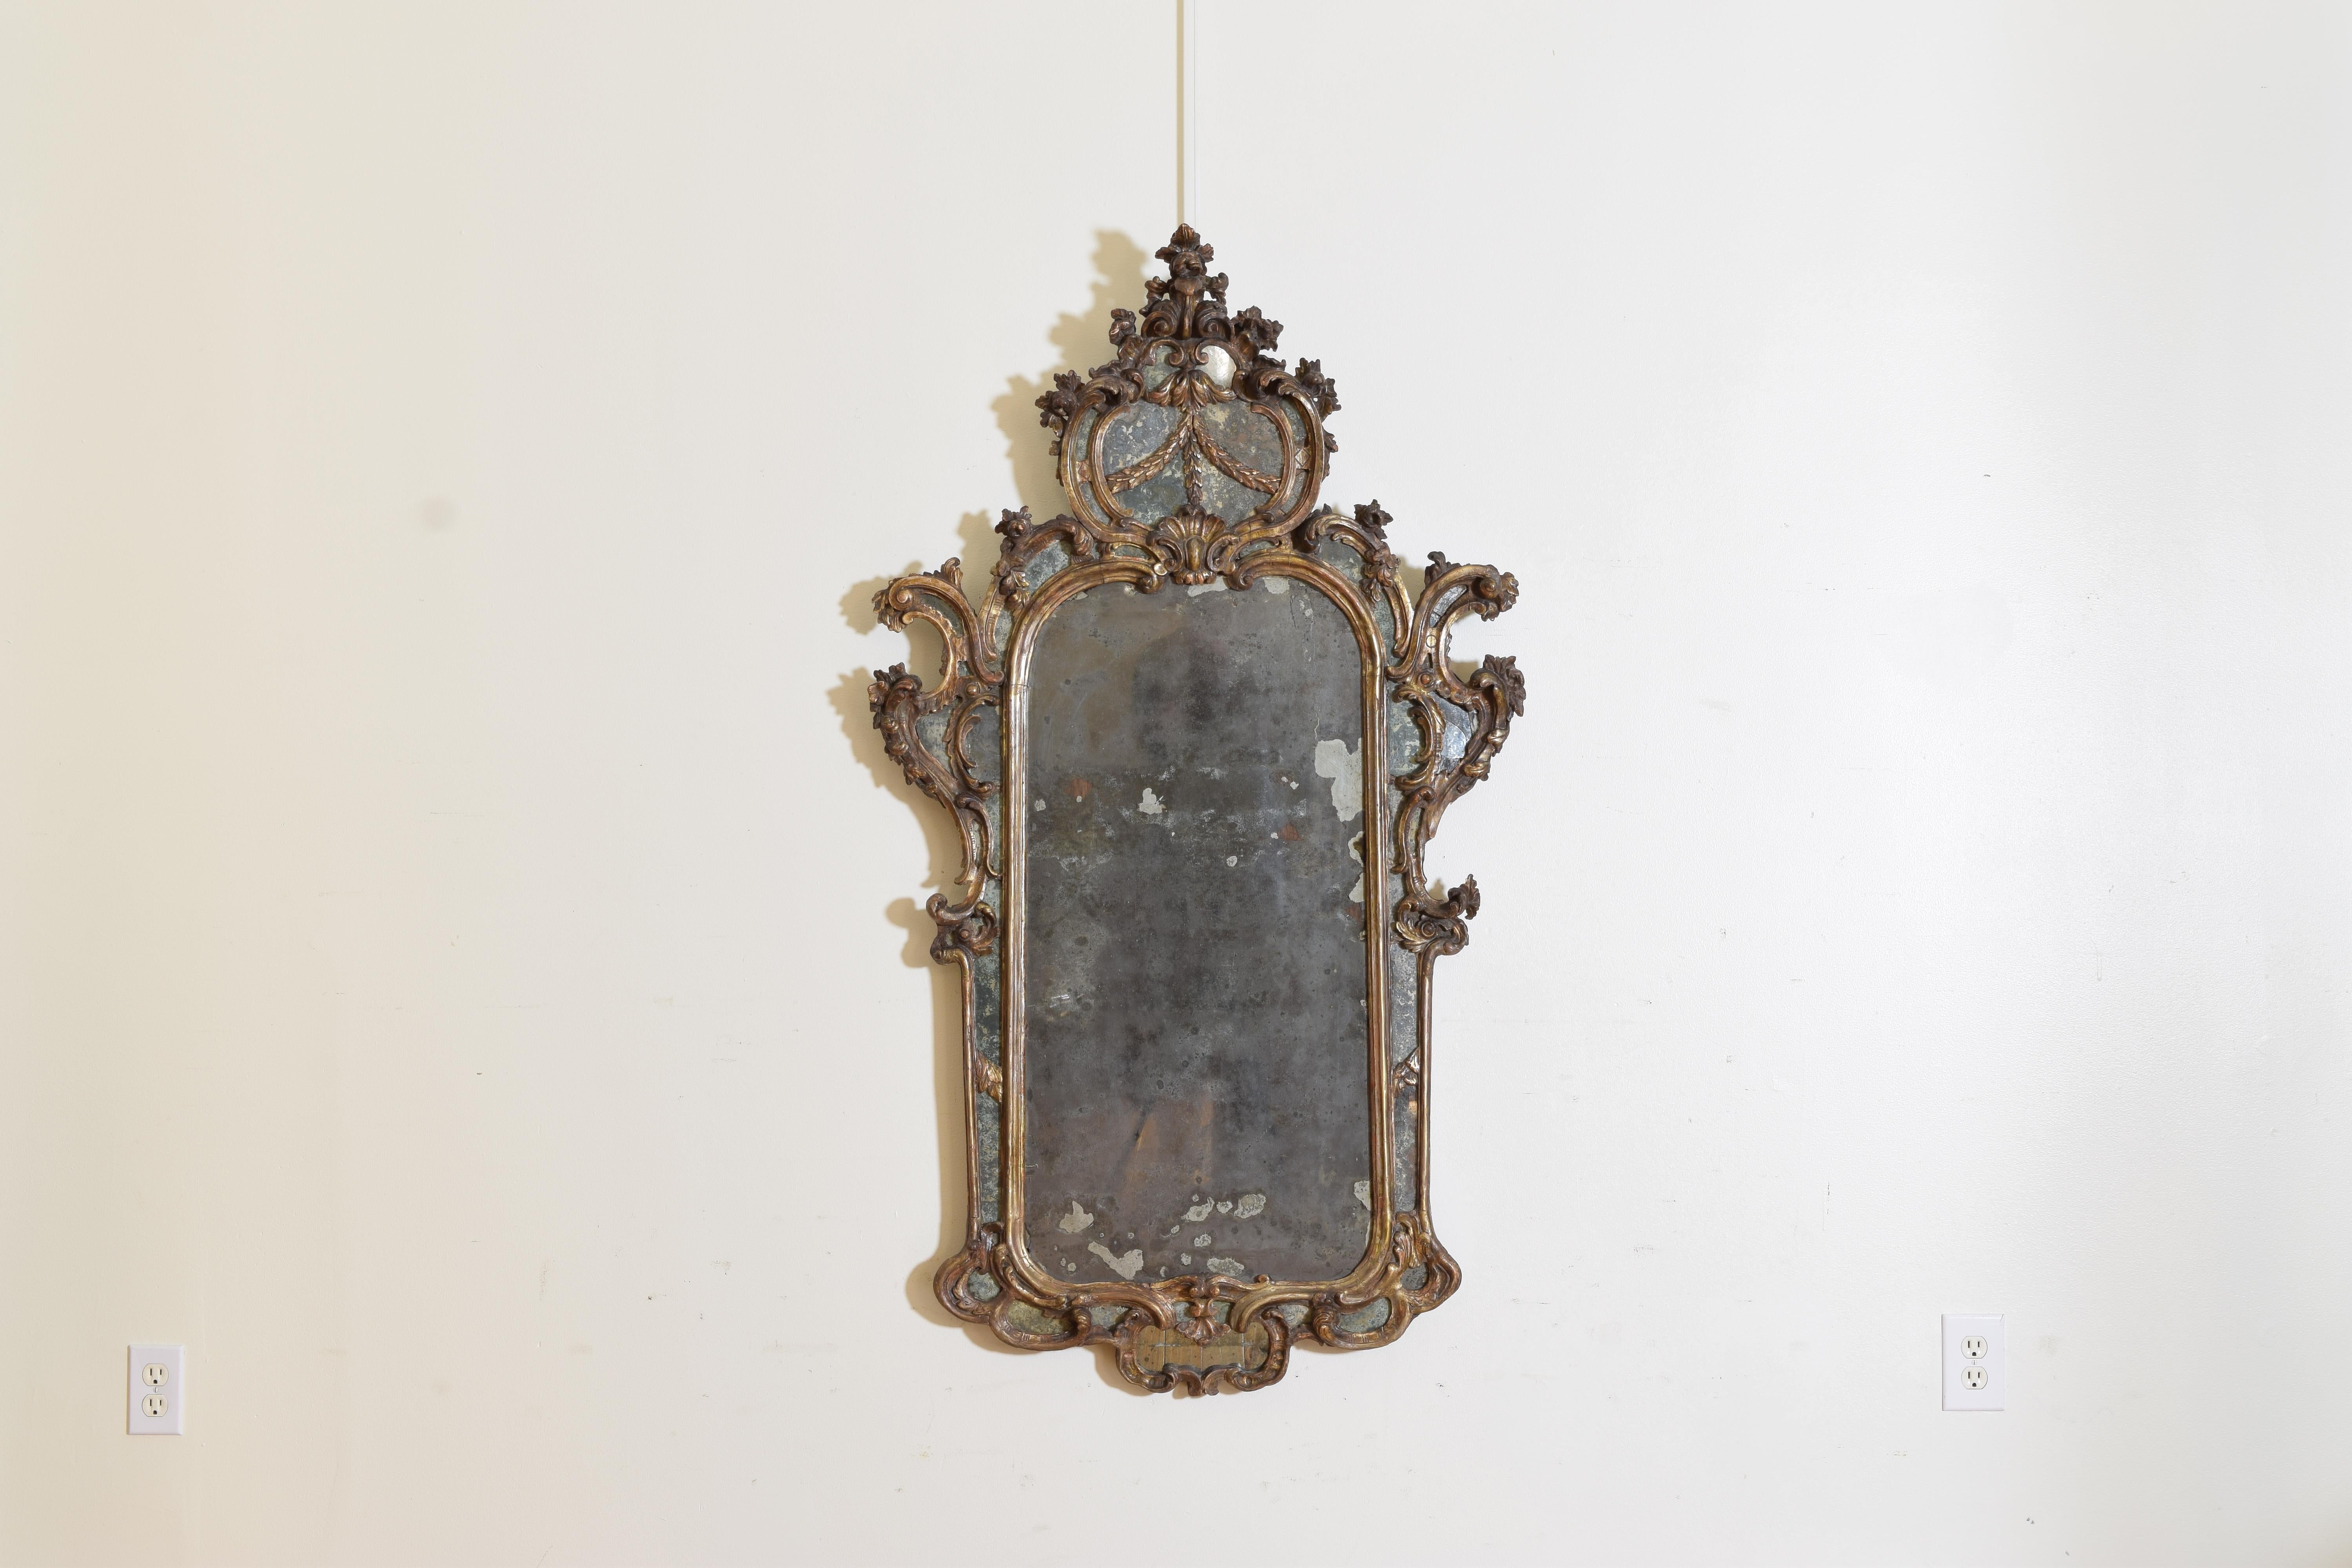 The original mirror plate of silvered mercury glass surmounted by a giltwood frame consisting of varying scrolls and leaf-forms the upper middle with a shell carving below carved garland roping